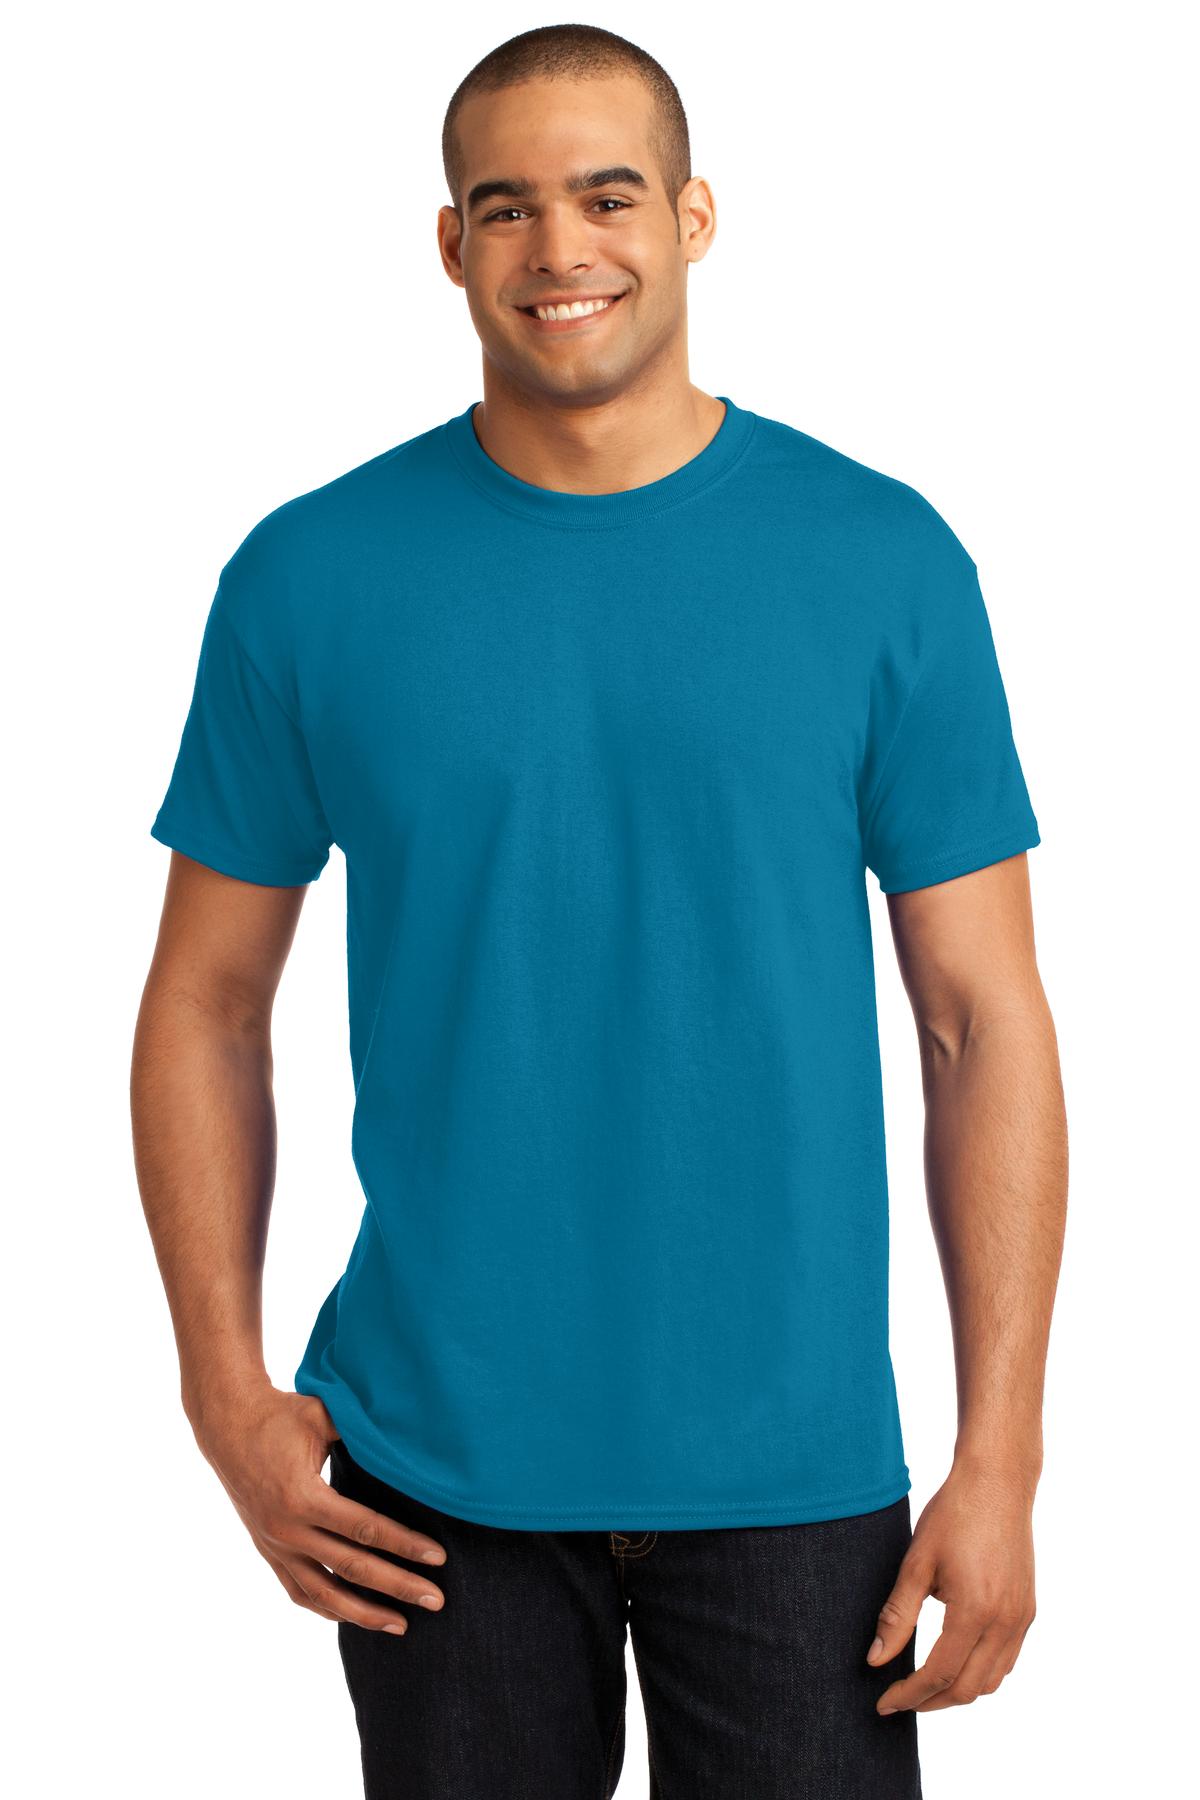 5170-Teal-S